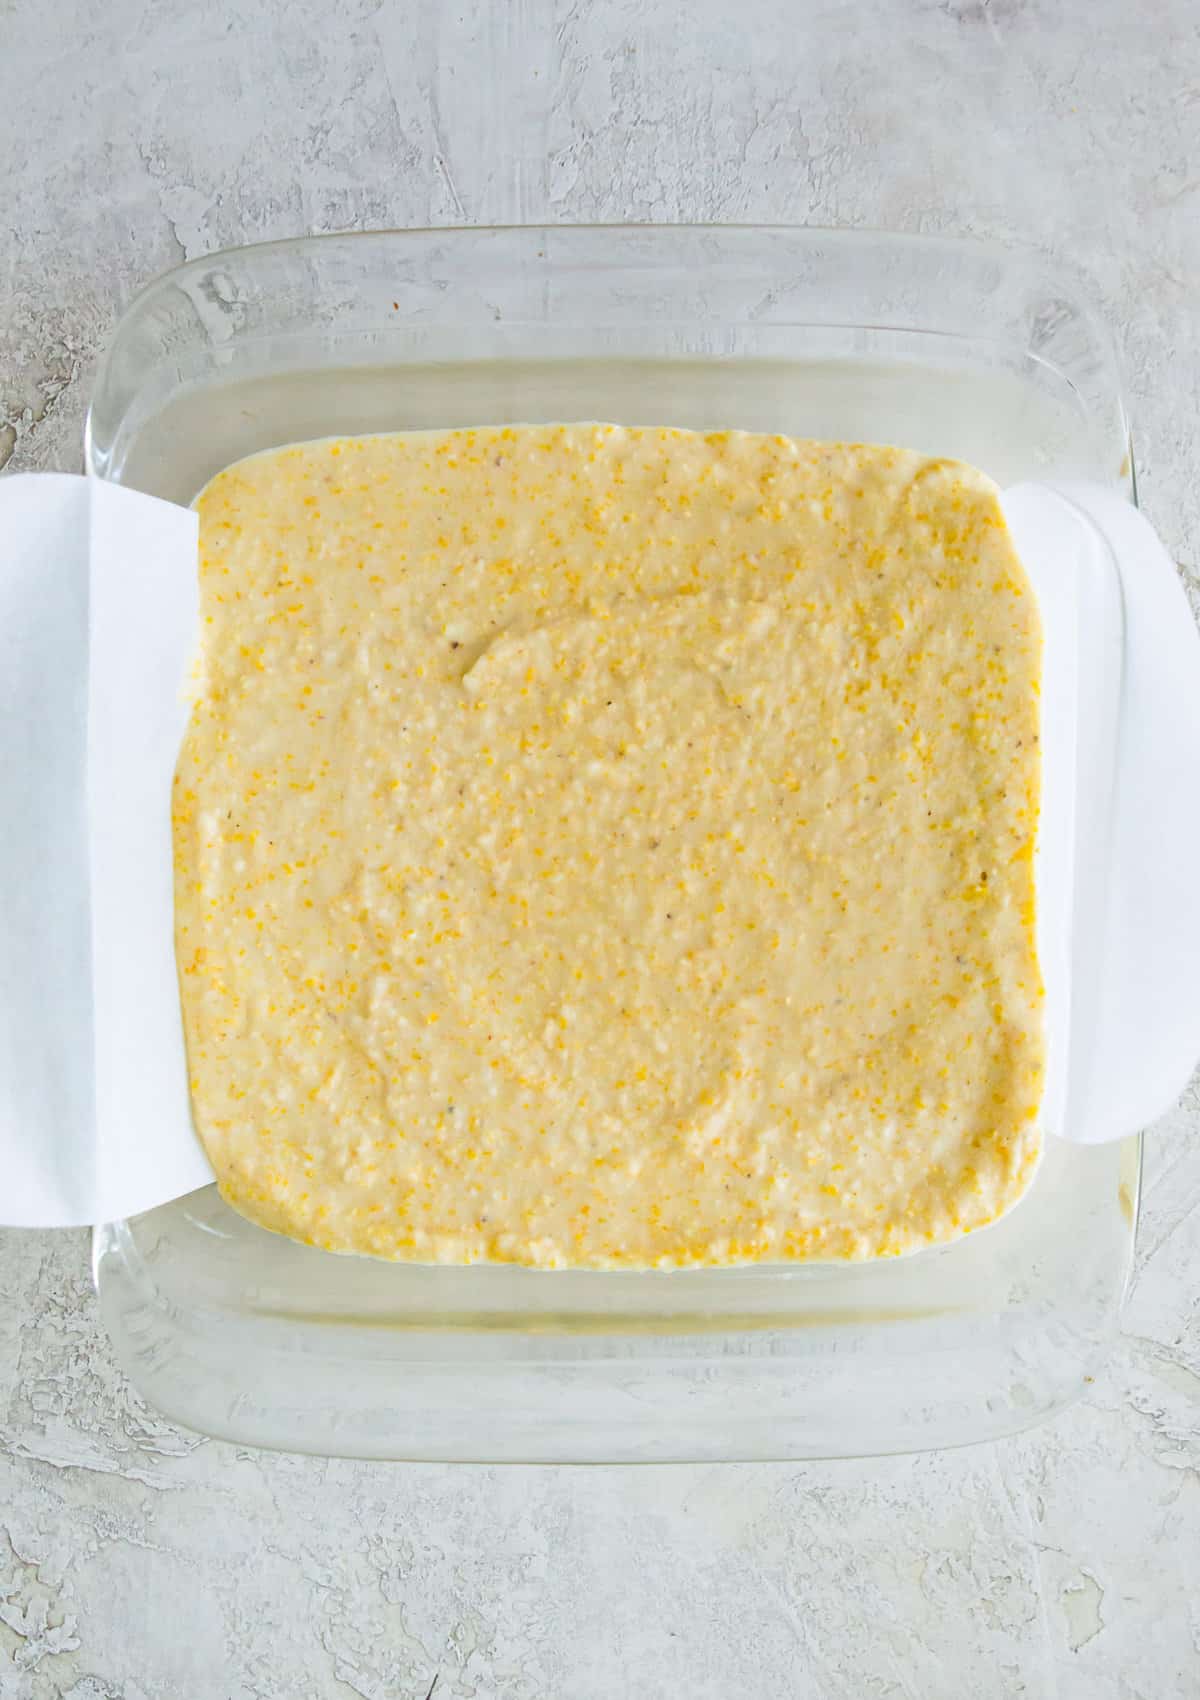 A square glass baking dish with the batter for making cornbread in it.